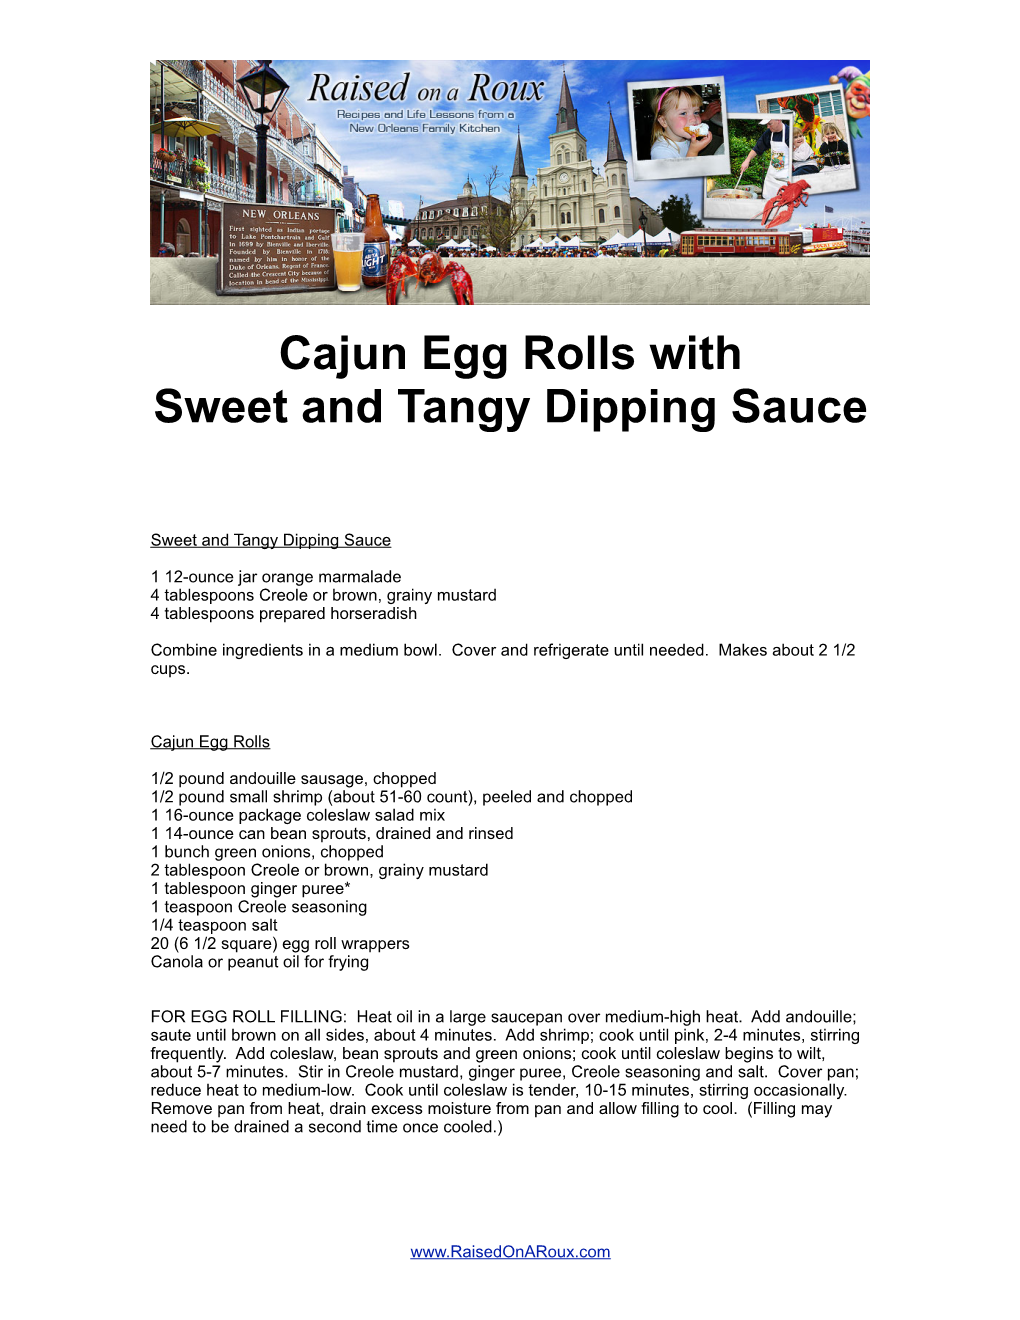 Cajun Egg Rolls with Sweet and Tangy Dipping Sauce